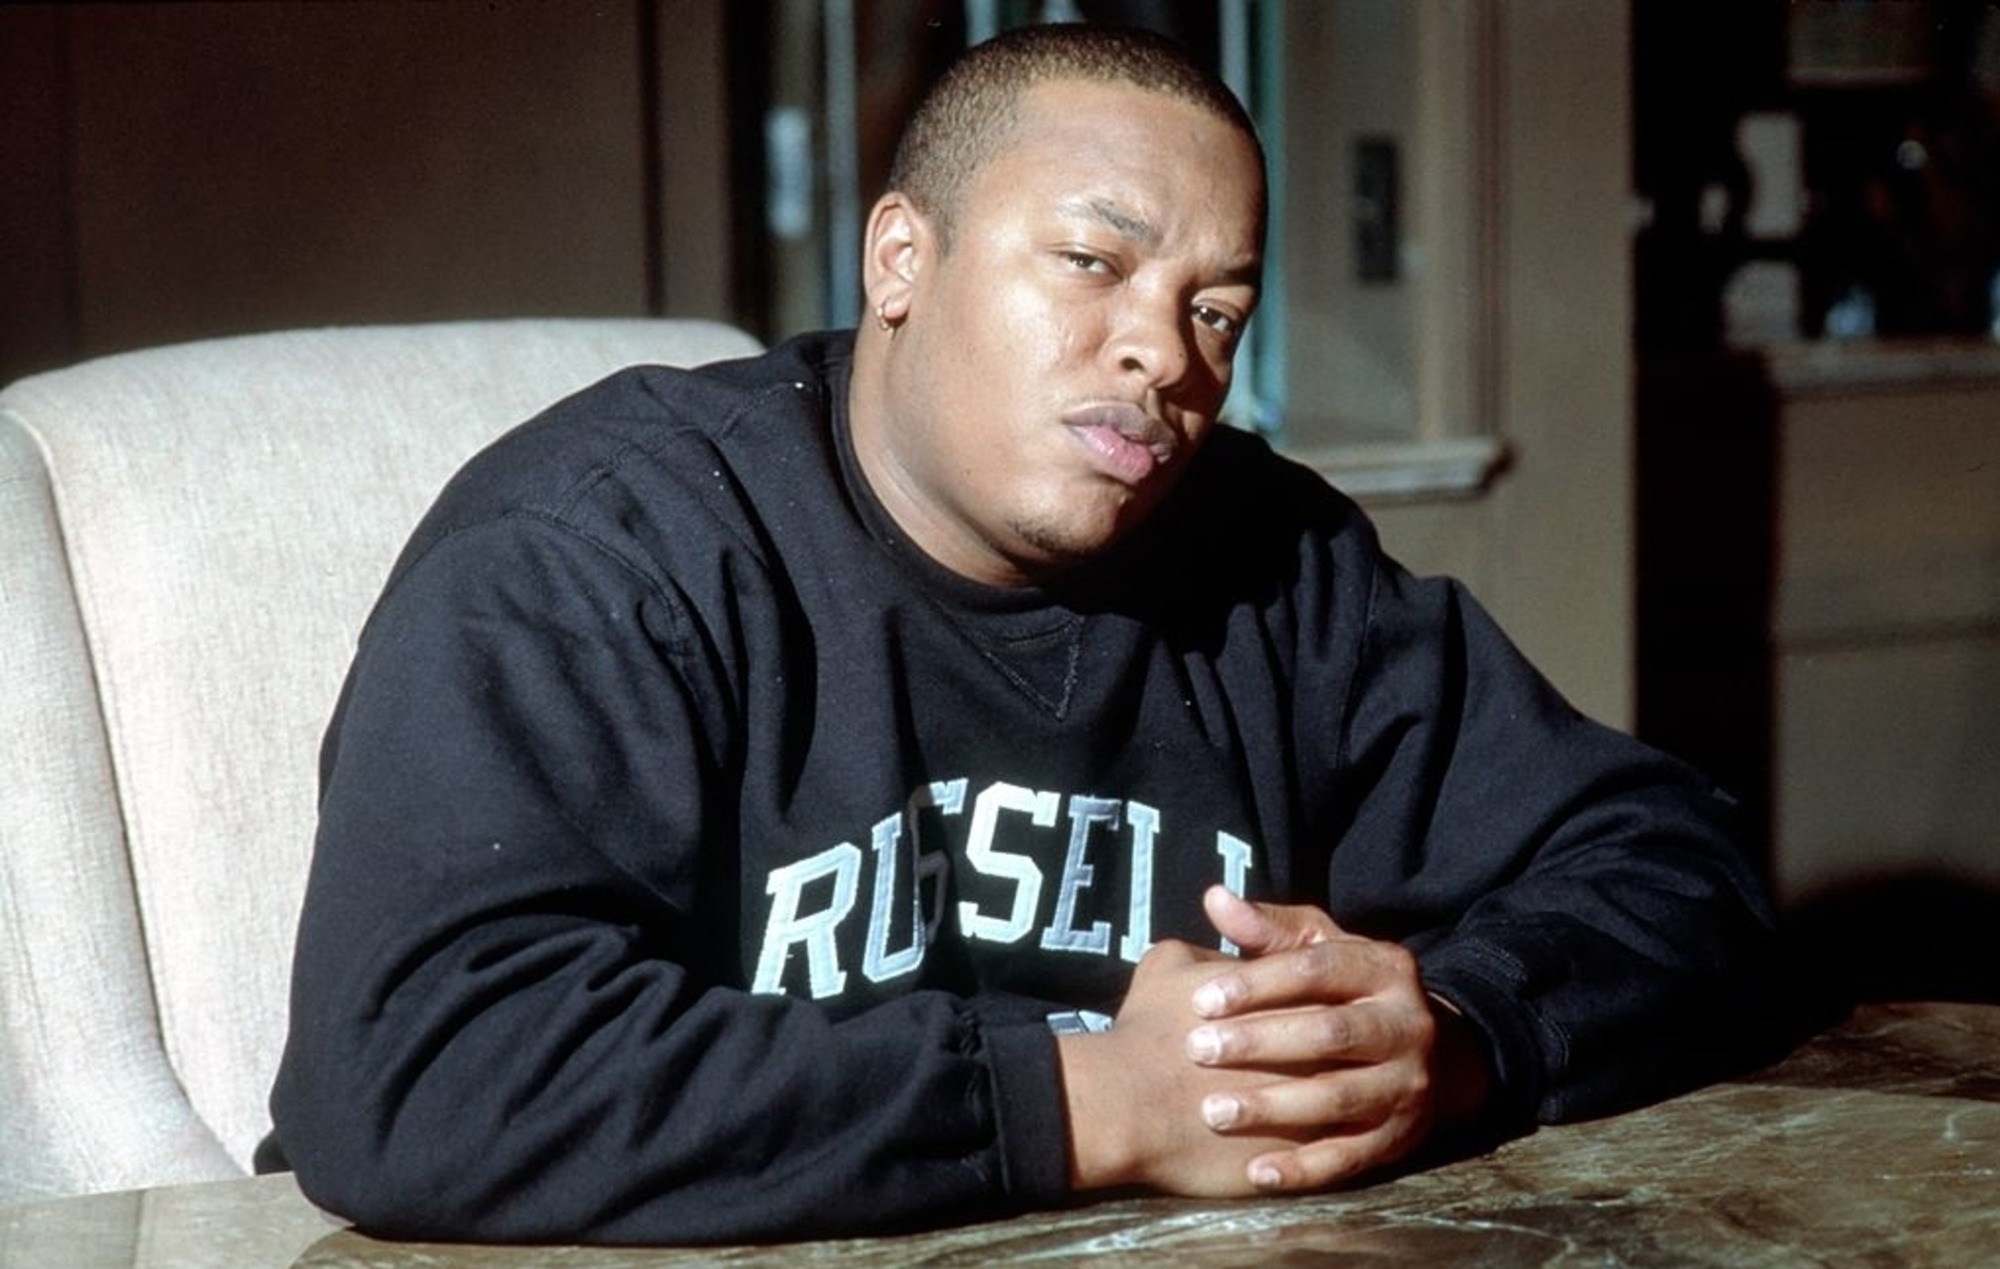 Dr. Dre’s ‘The Chronic’: A 4/20 deep dive into the album that changed hip hop forever